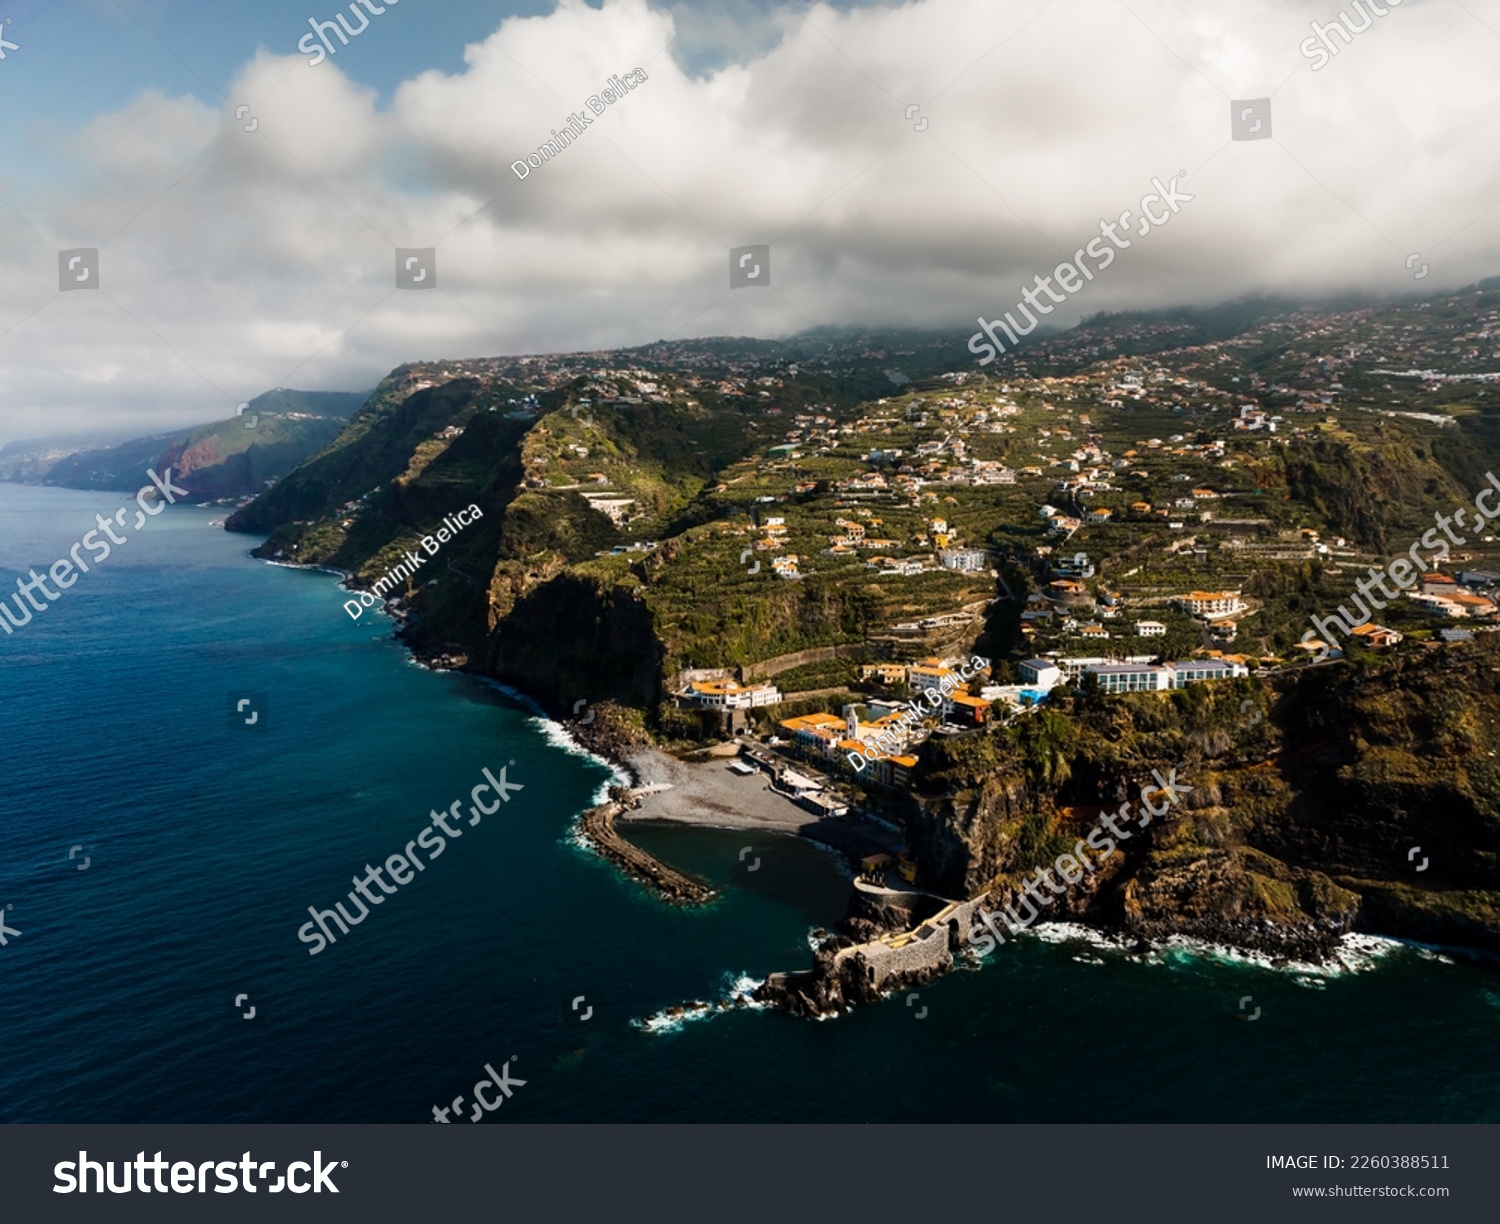 Ponta do Sol is a municipality in the southwestern coast of the island of Madeira, in the archipelago of Madeira #2260388511